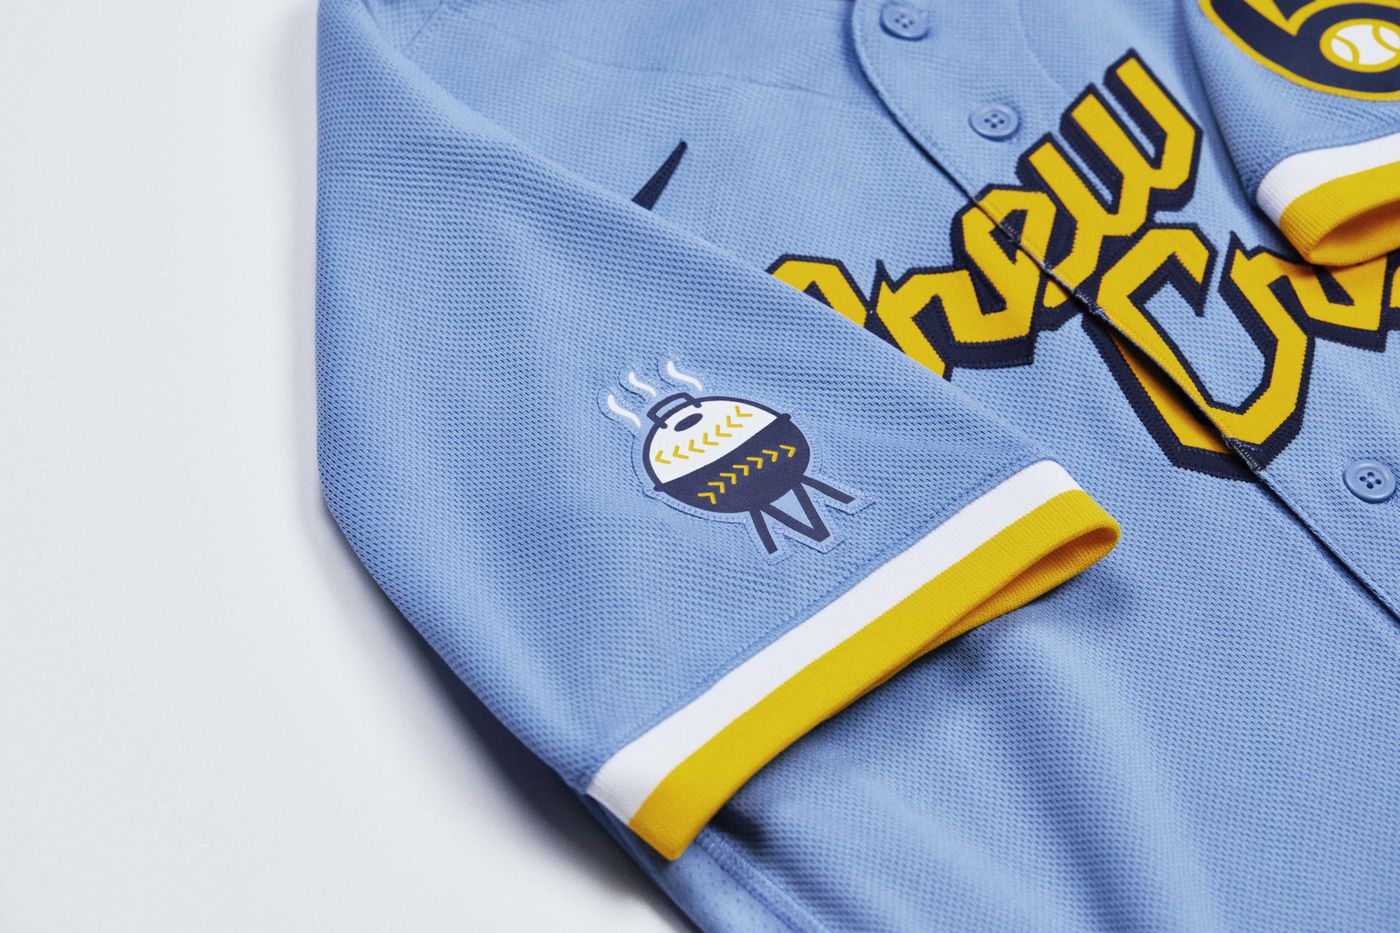 willy adames city connect jersey